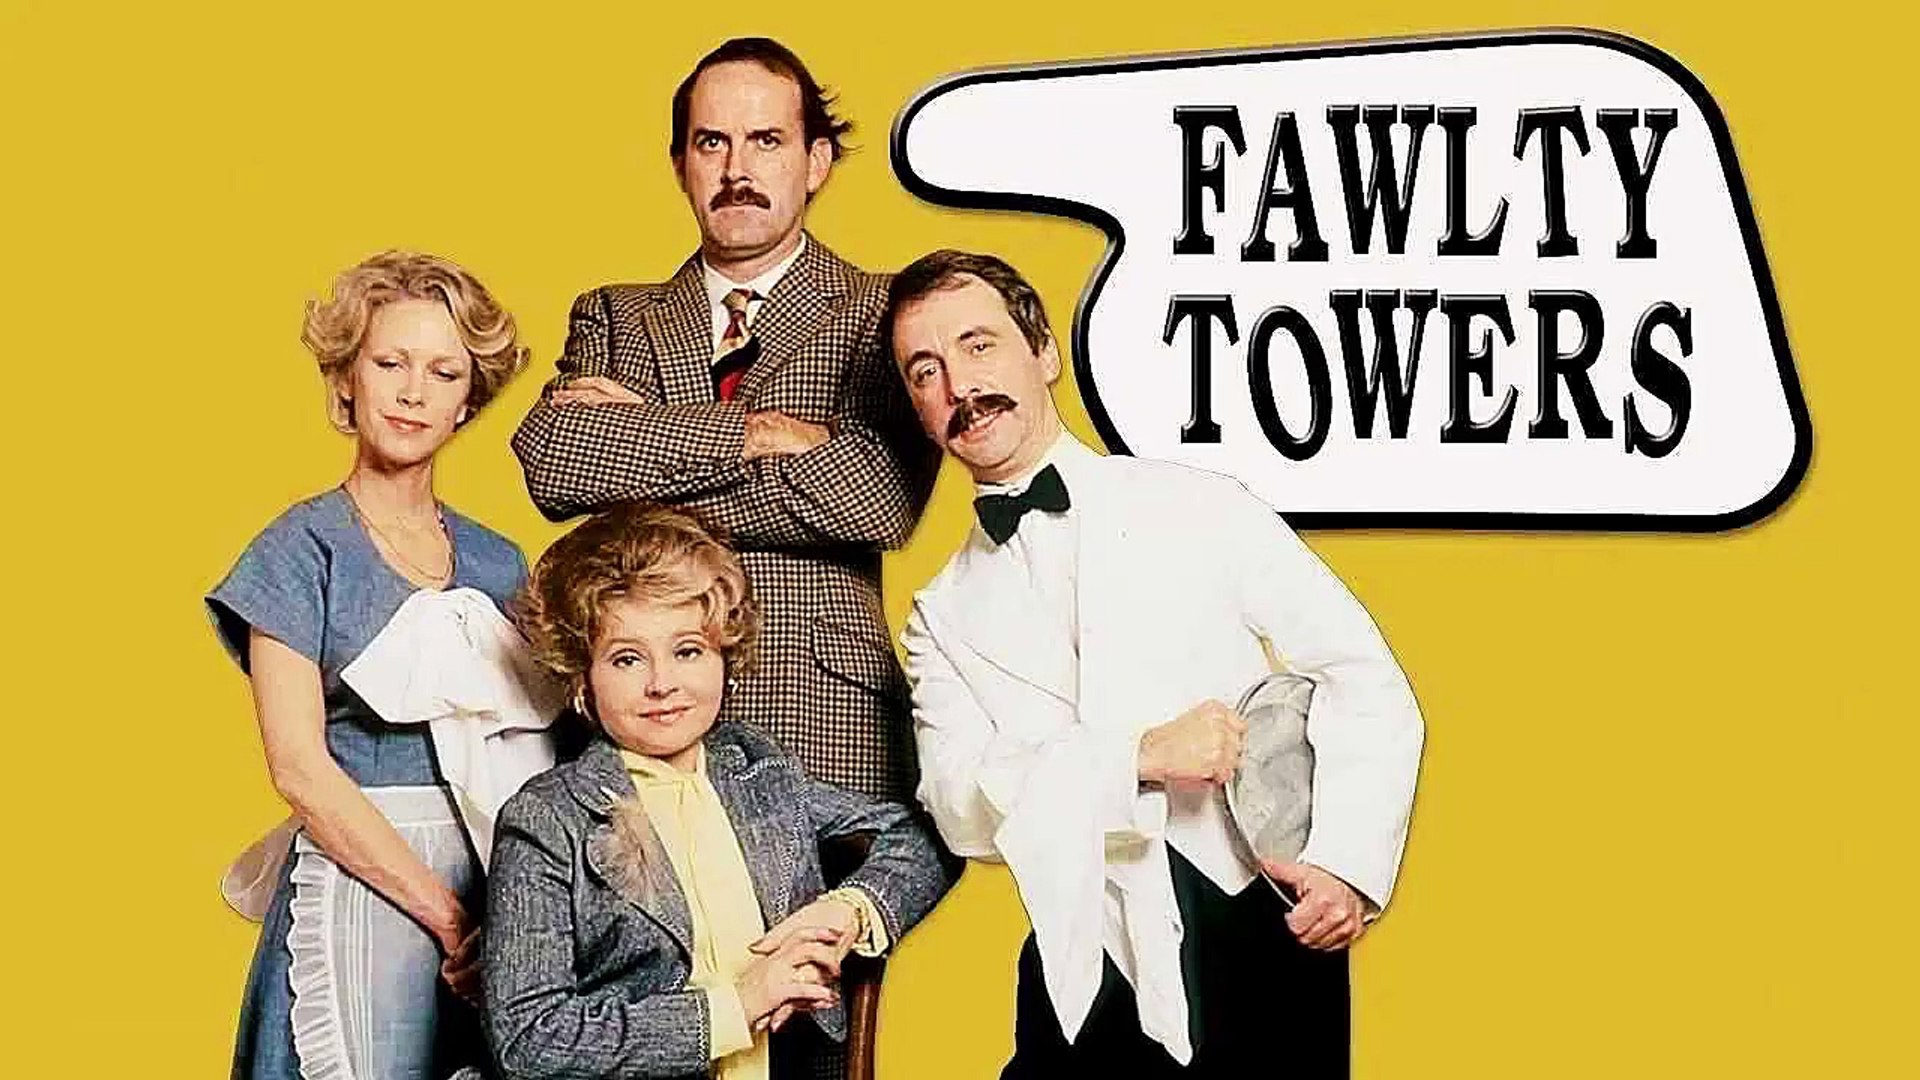 Fawlty Towers S02E04 (EngSub) - video Dailymotion